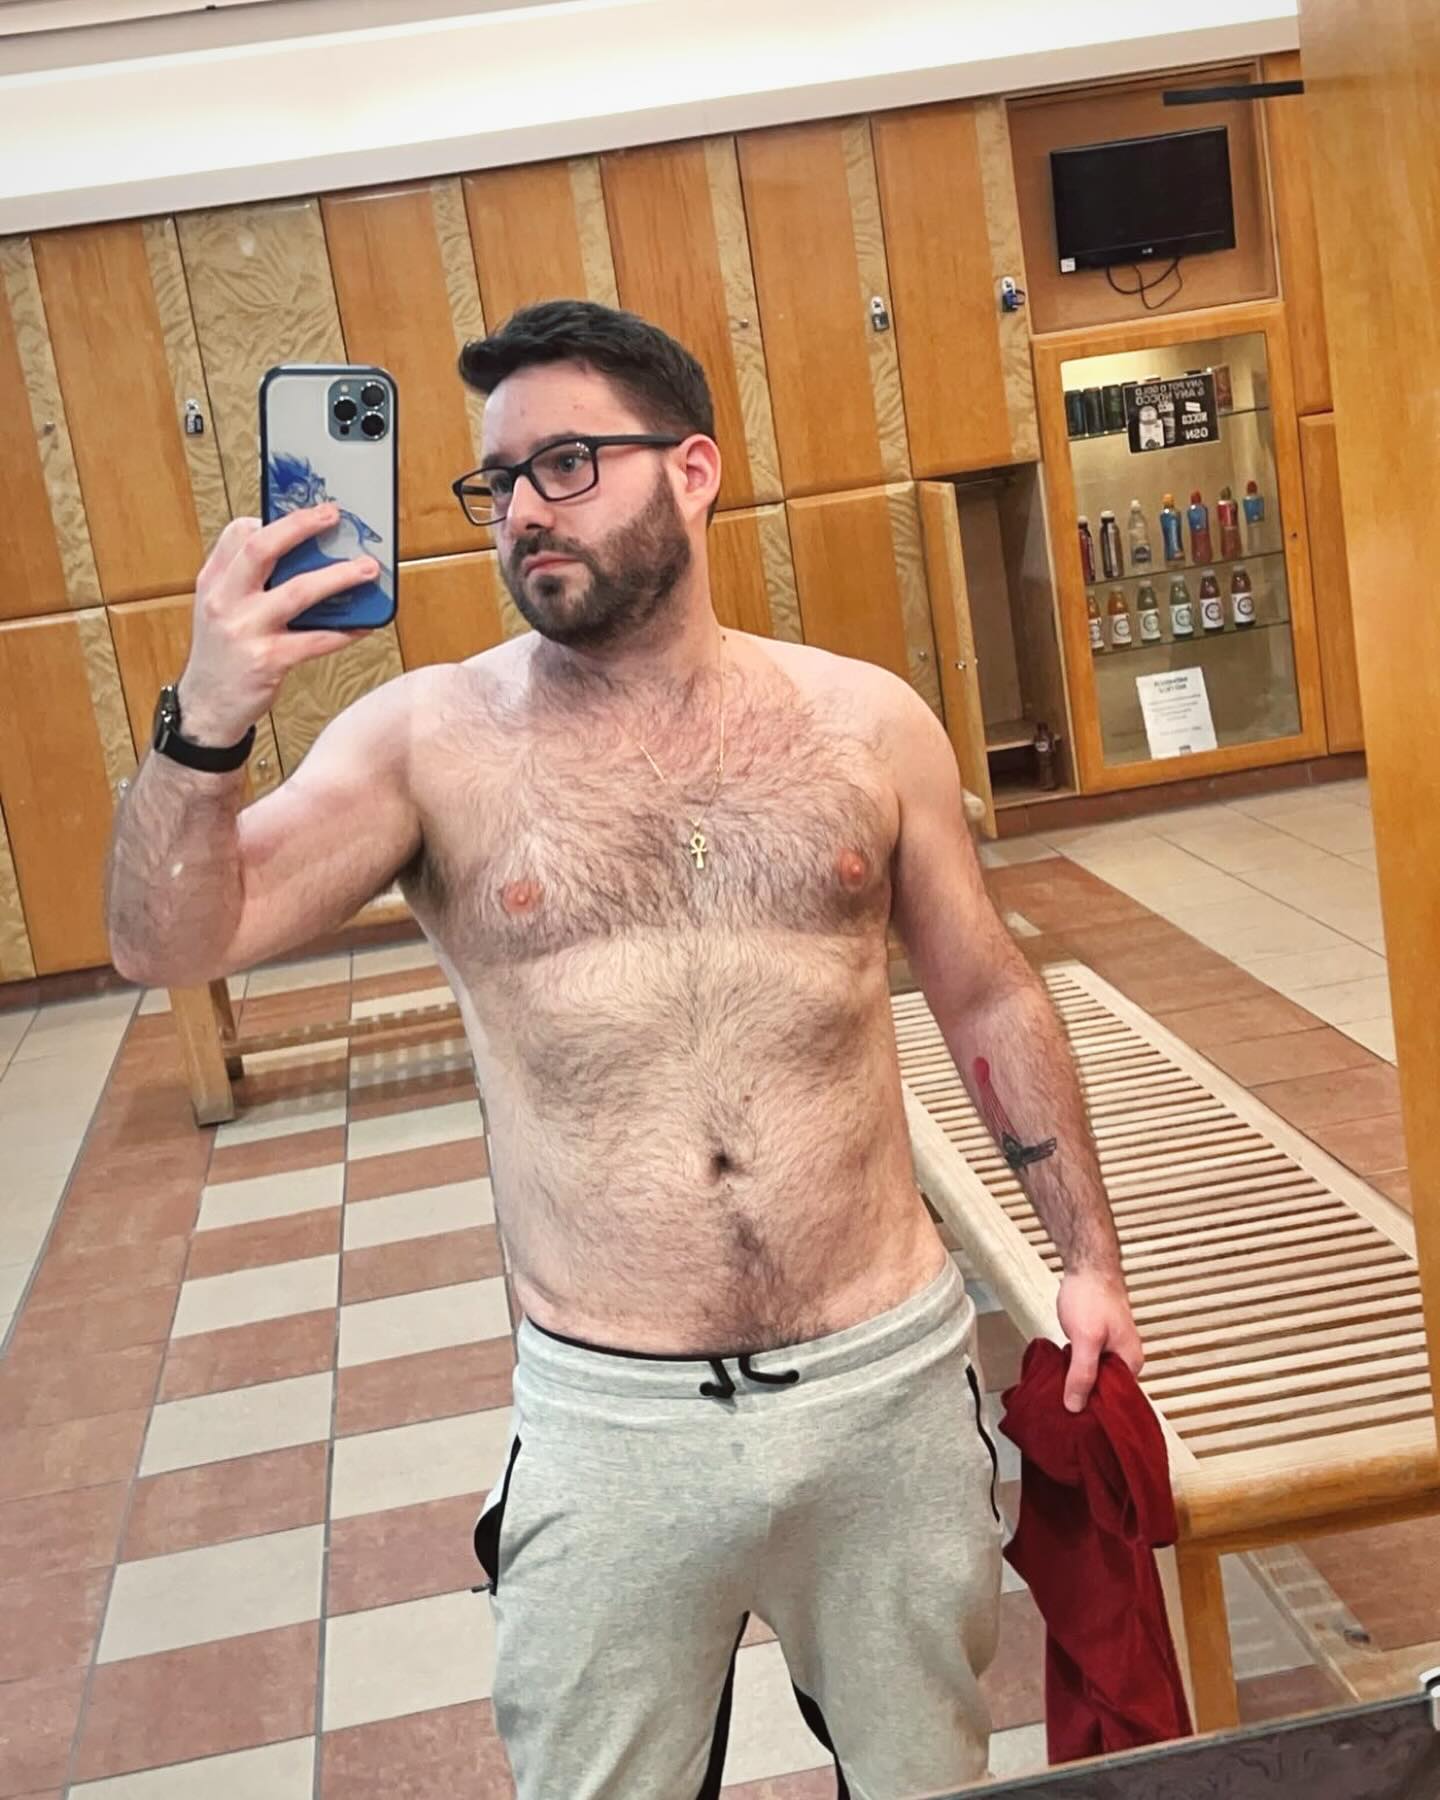 Progress is small but I can feel the difference.  This is just me keeping myself accountable.

#Gym #gymselfie #bodypositivity #slowbutsteady 
#gay #loveyourself  #selfimprovement